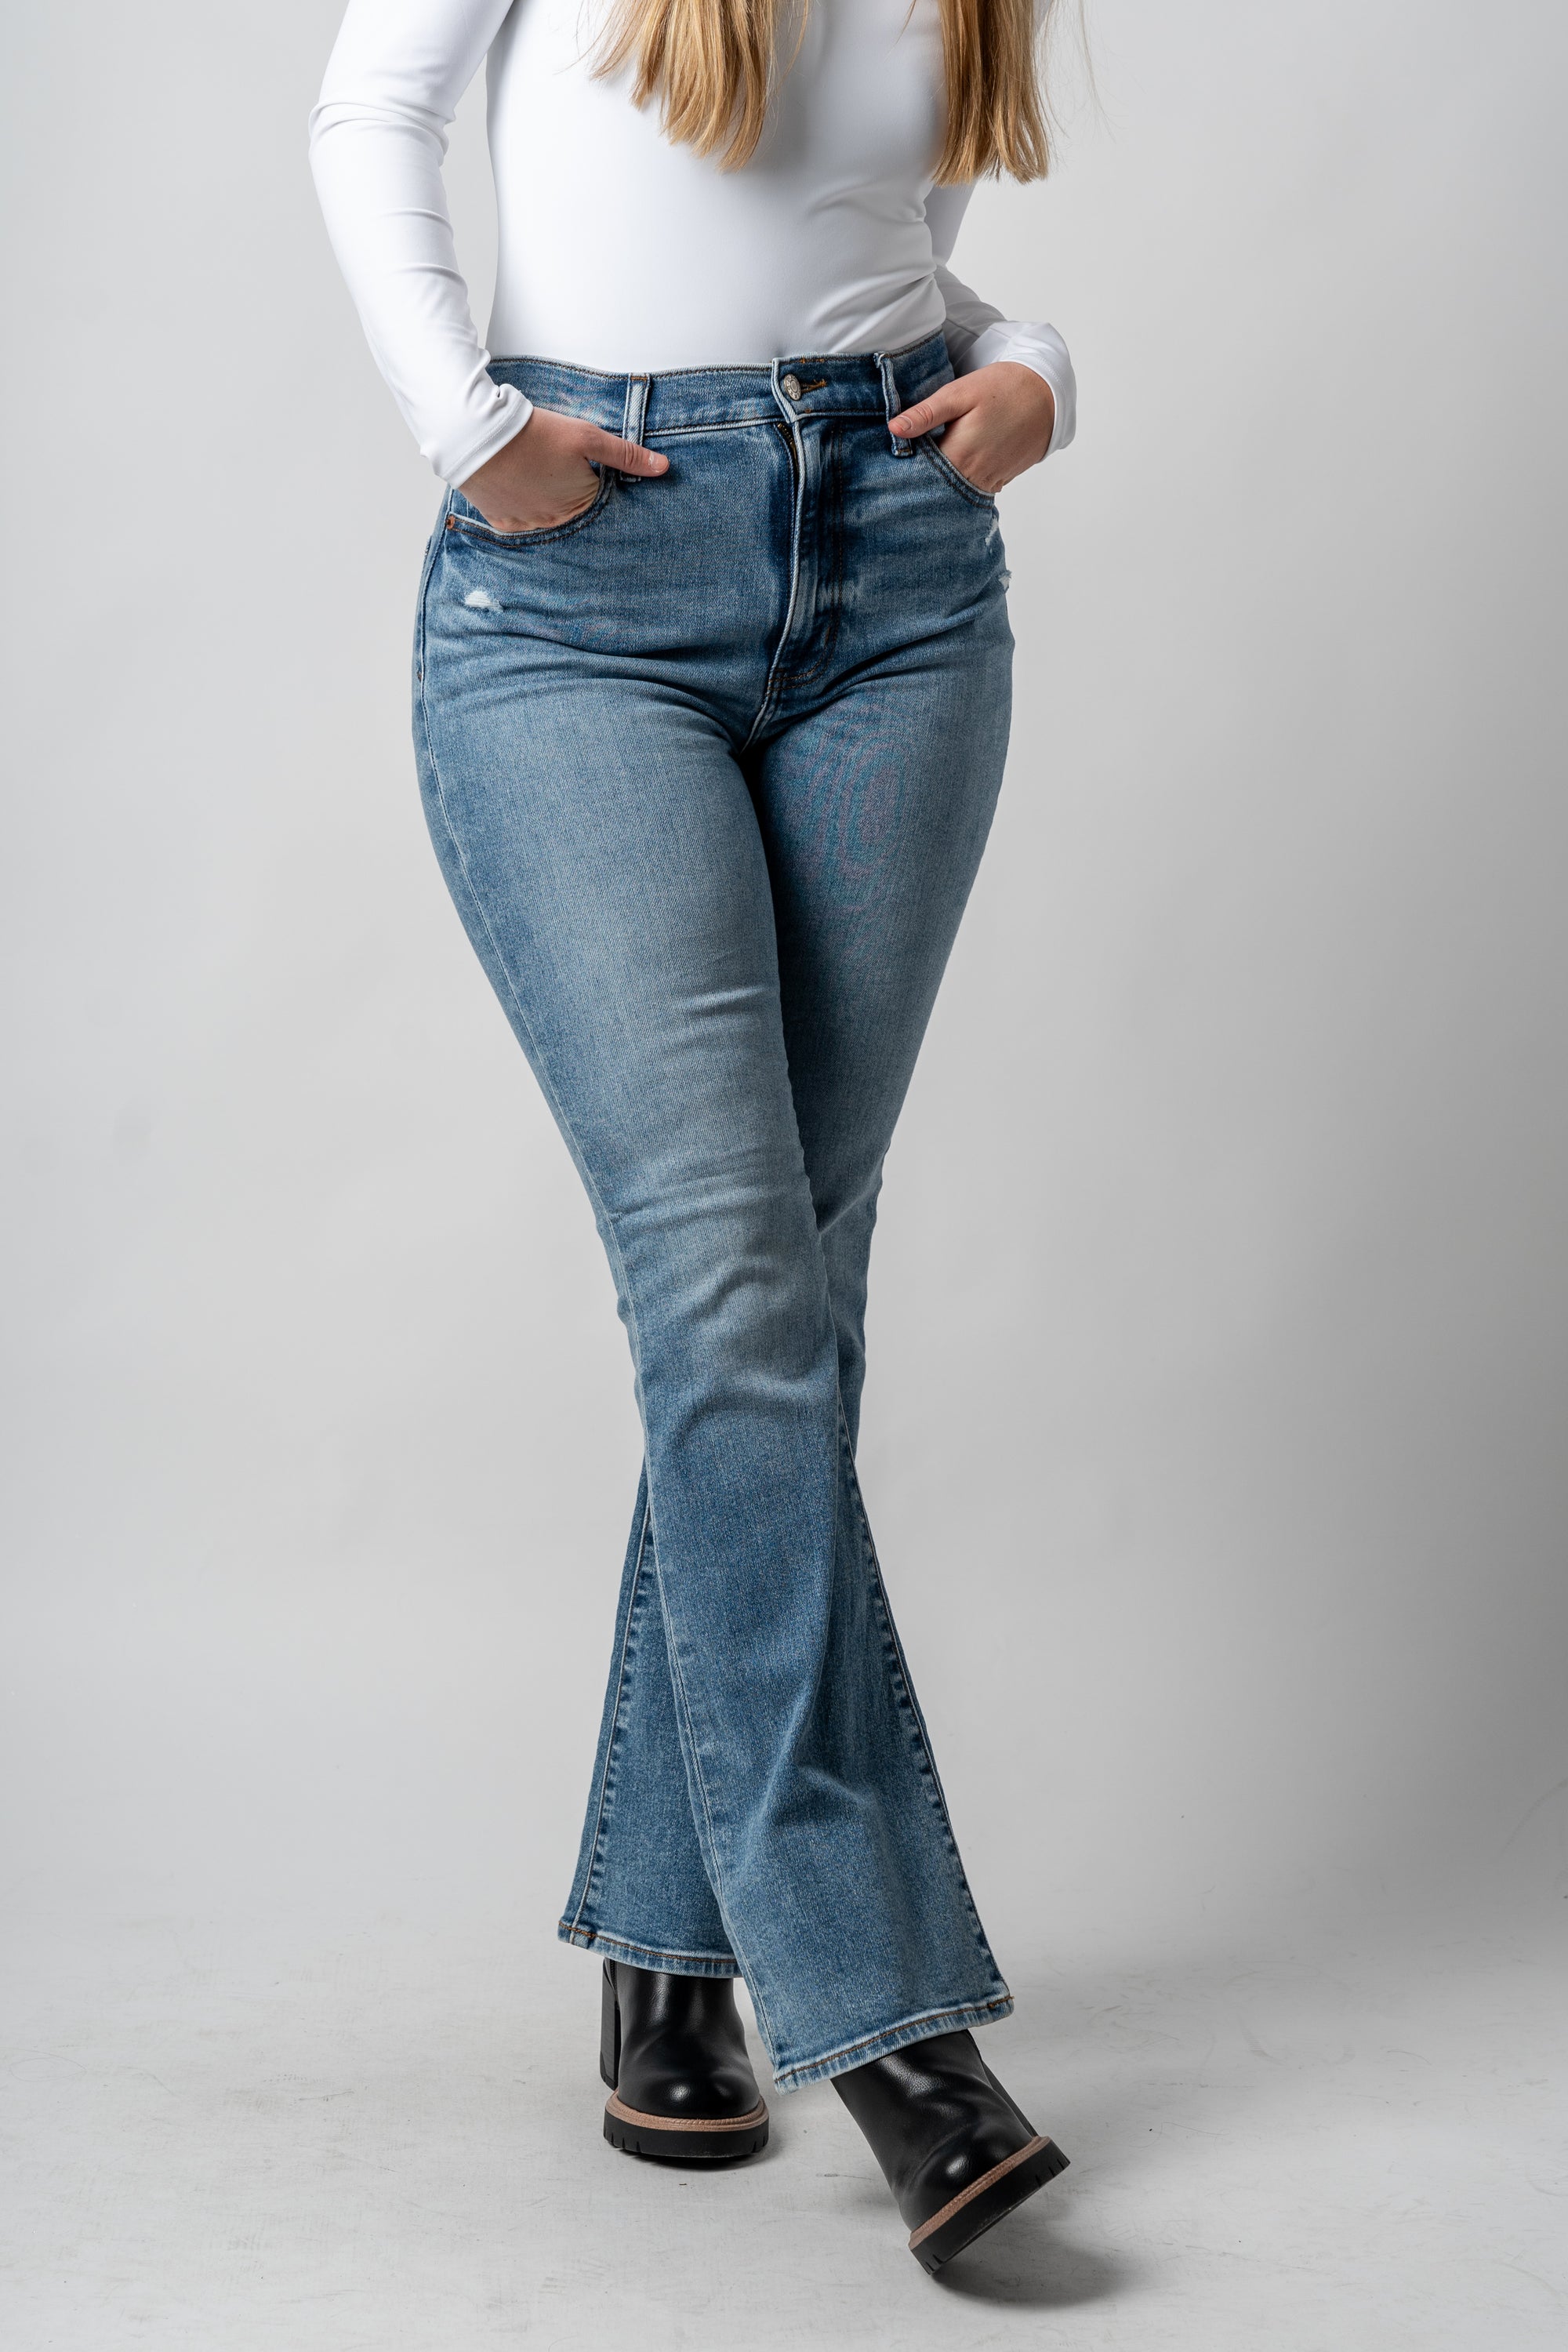 Daze go getter high rise flare jeans glow up | Lush Fashion Lounge: boutique women's jeans, fashion jeans for women, affordable fashion jeans, cute boutique jeans